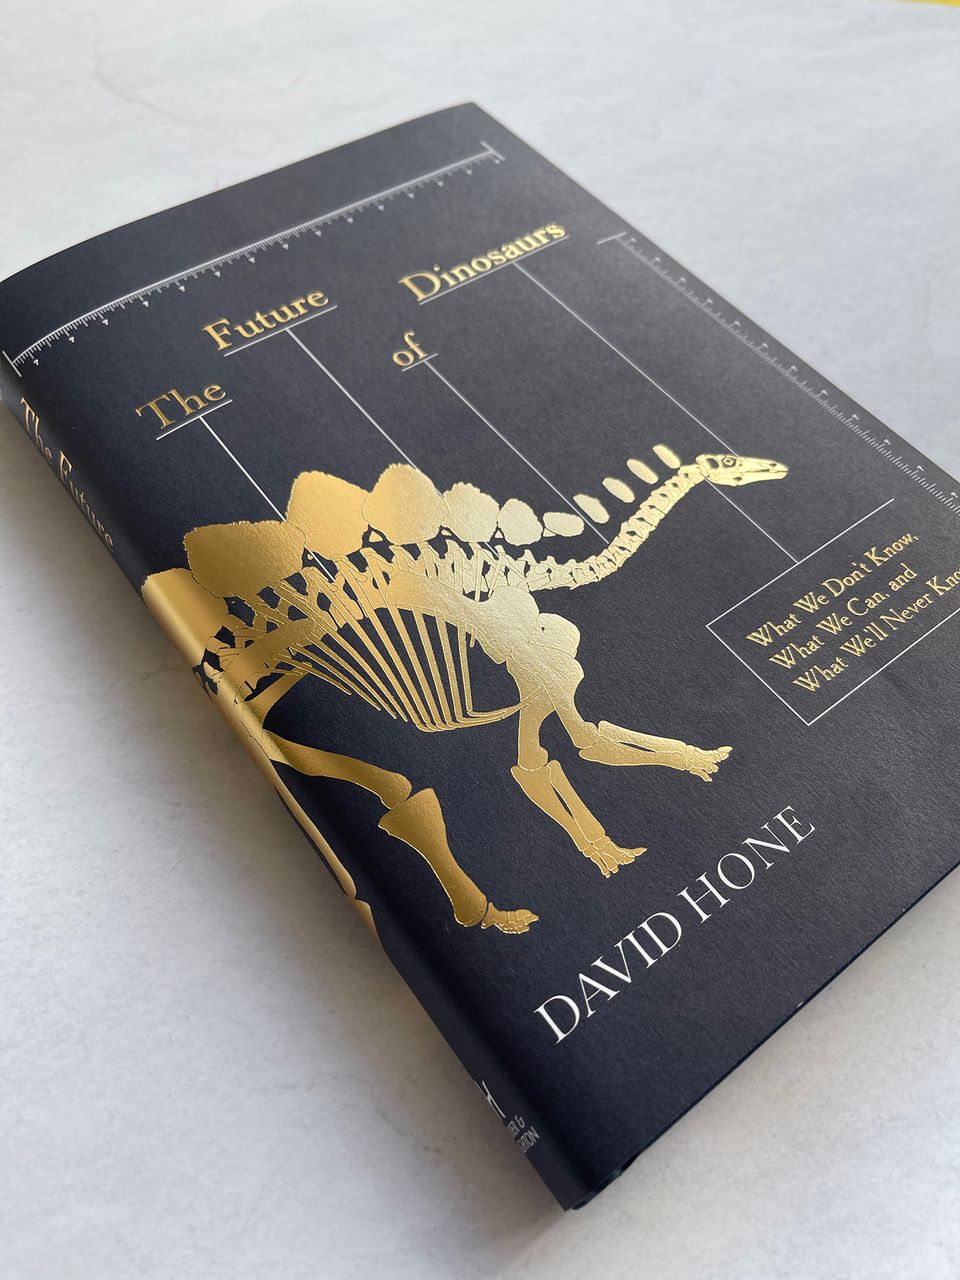 The Future of Dinosaurs: An Interview With Dr. David Hone